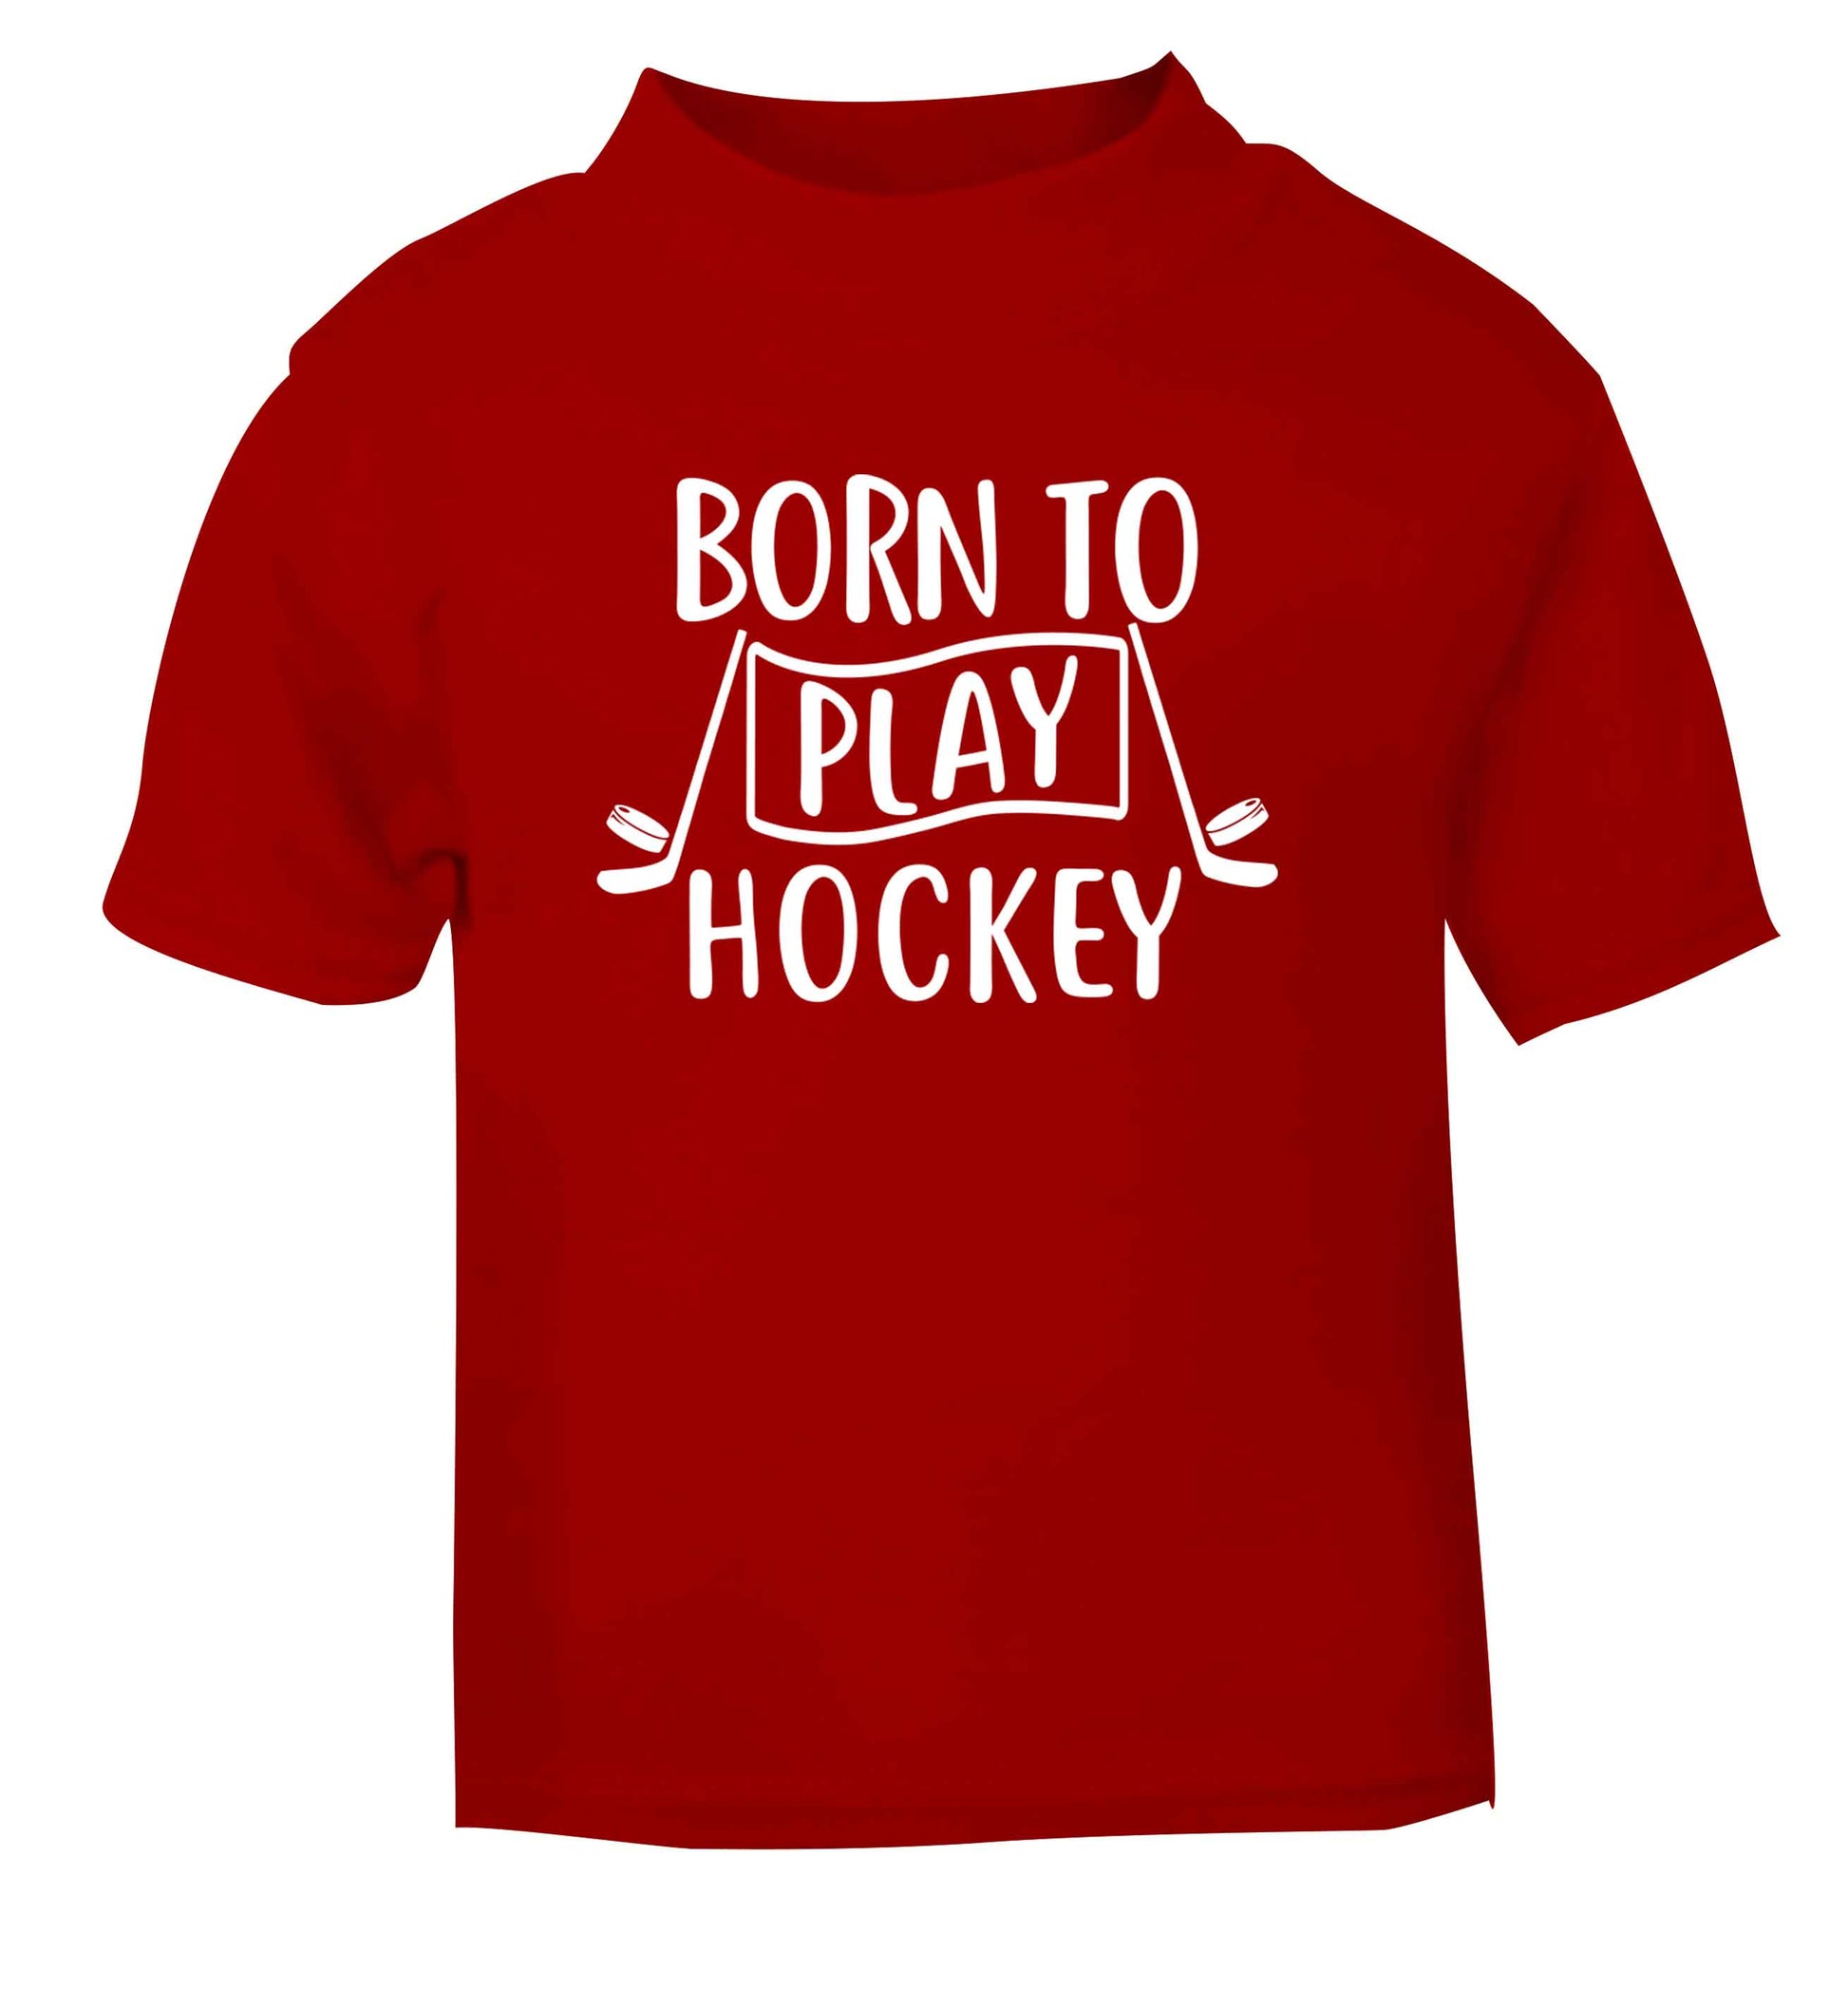 Born to play hockey red Baby Toddler Tshirt 2 Years